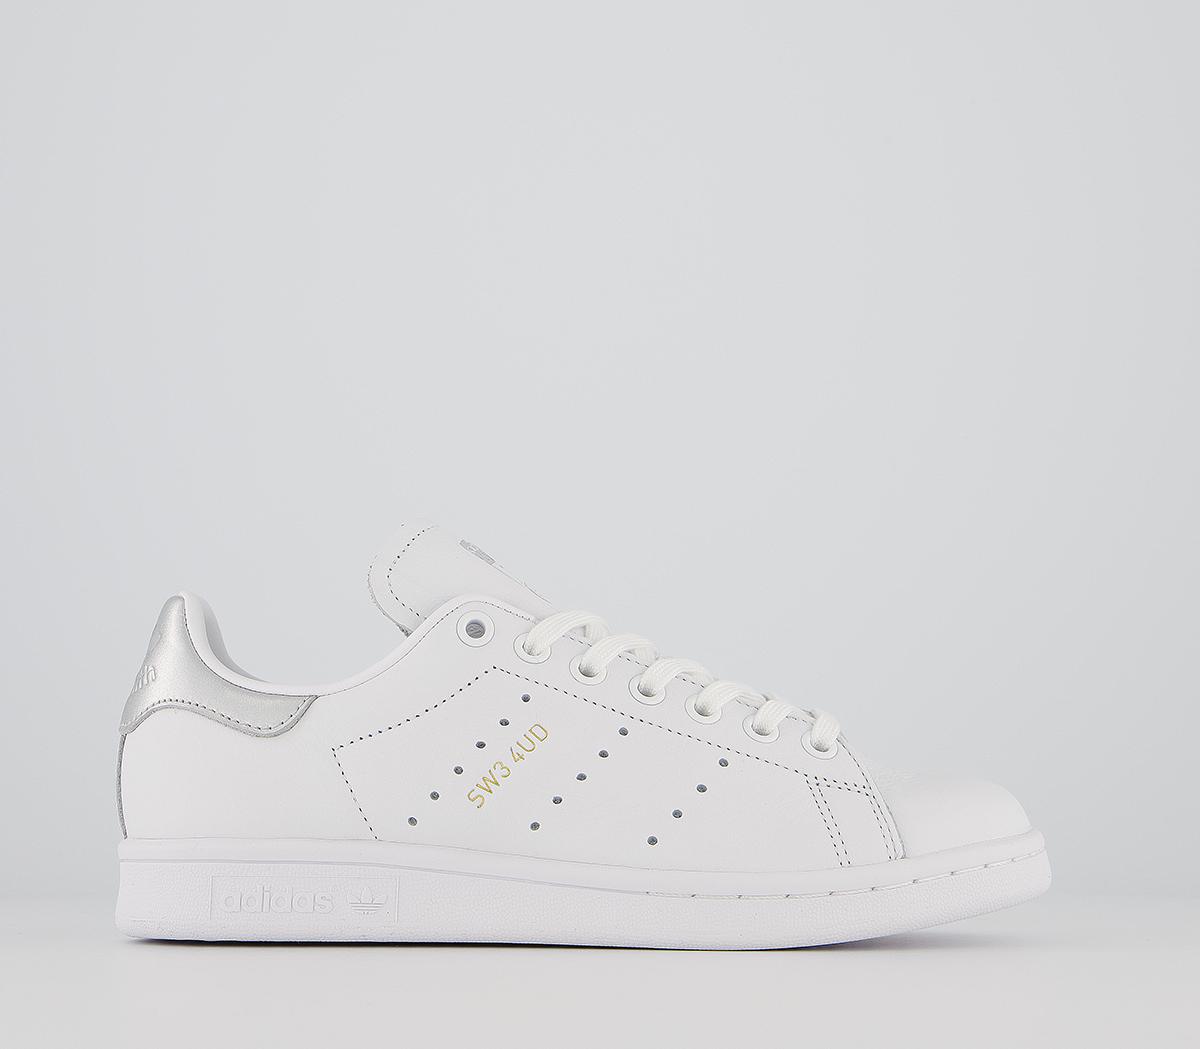 adidas Trainers White Silver Metallic 4ud Exclusive - Women's Trainers